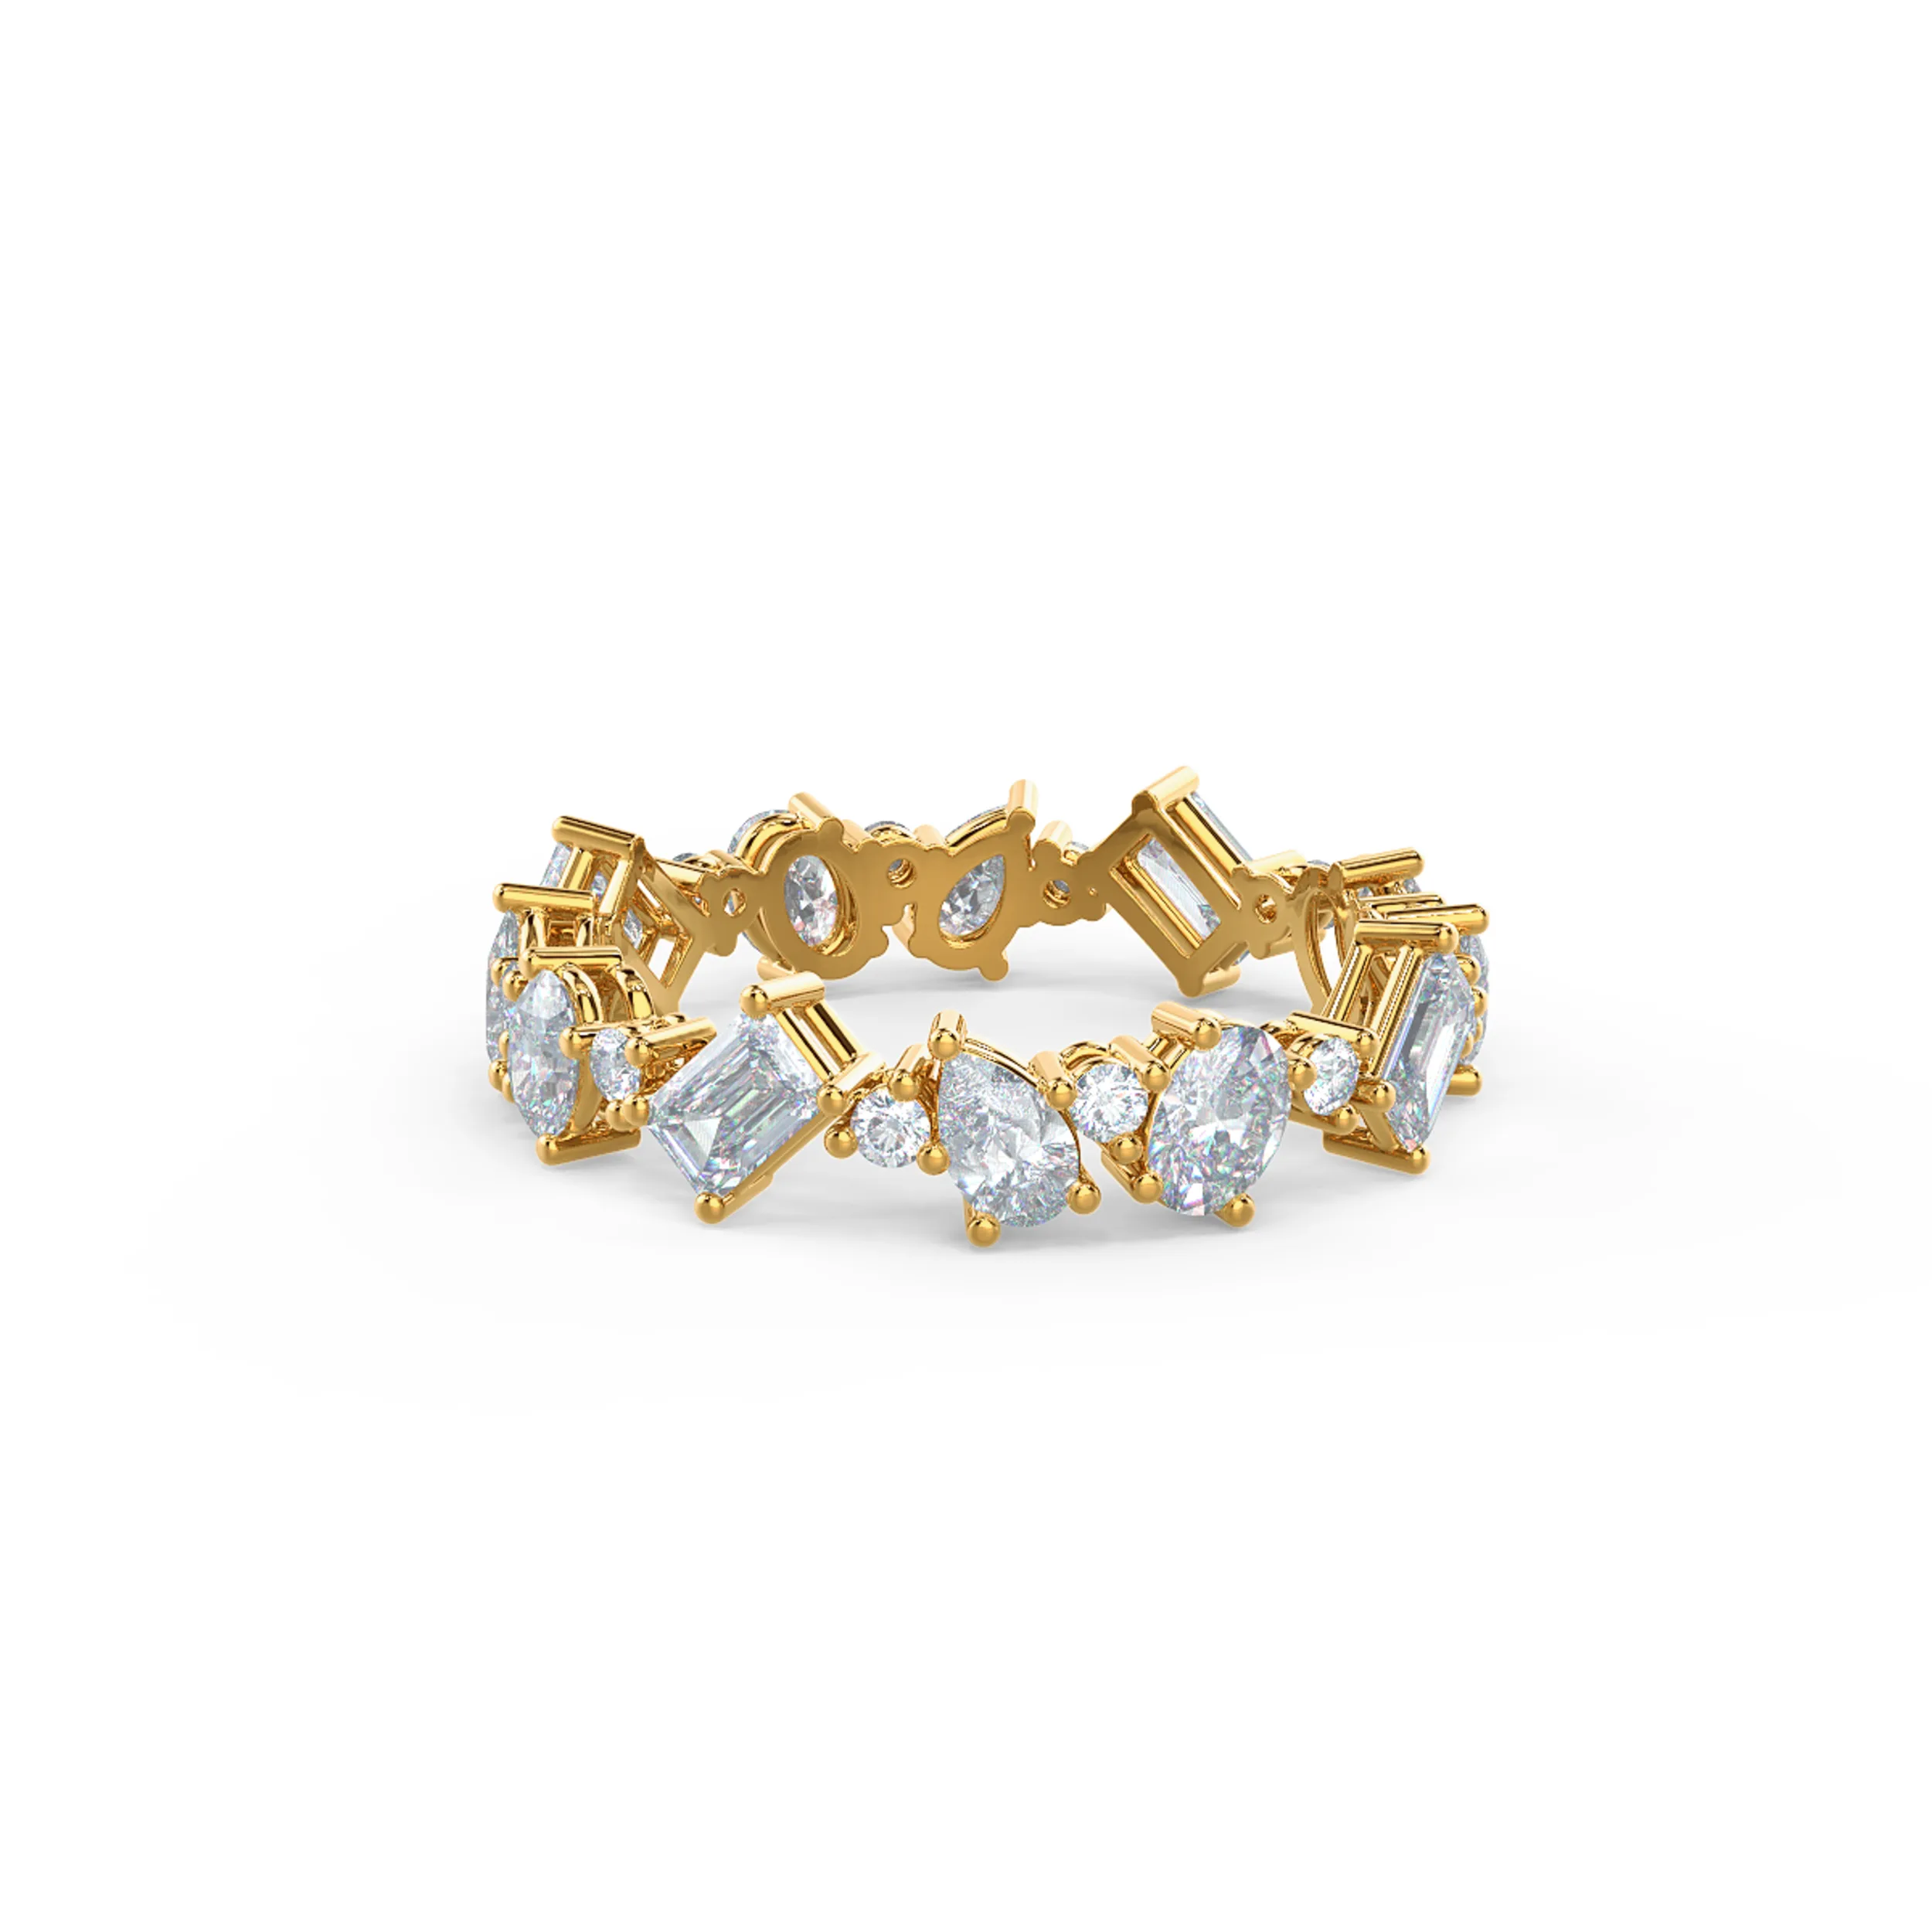 2.0 ct Diamonds set in Yellow Gold Cassie Eternity Band (Main View)